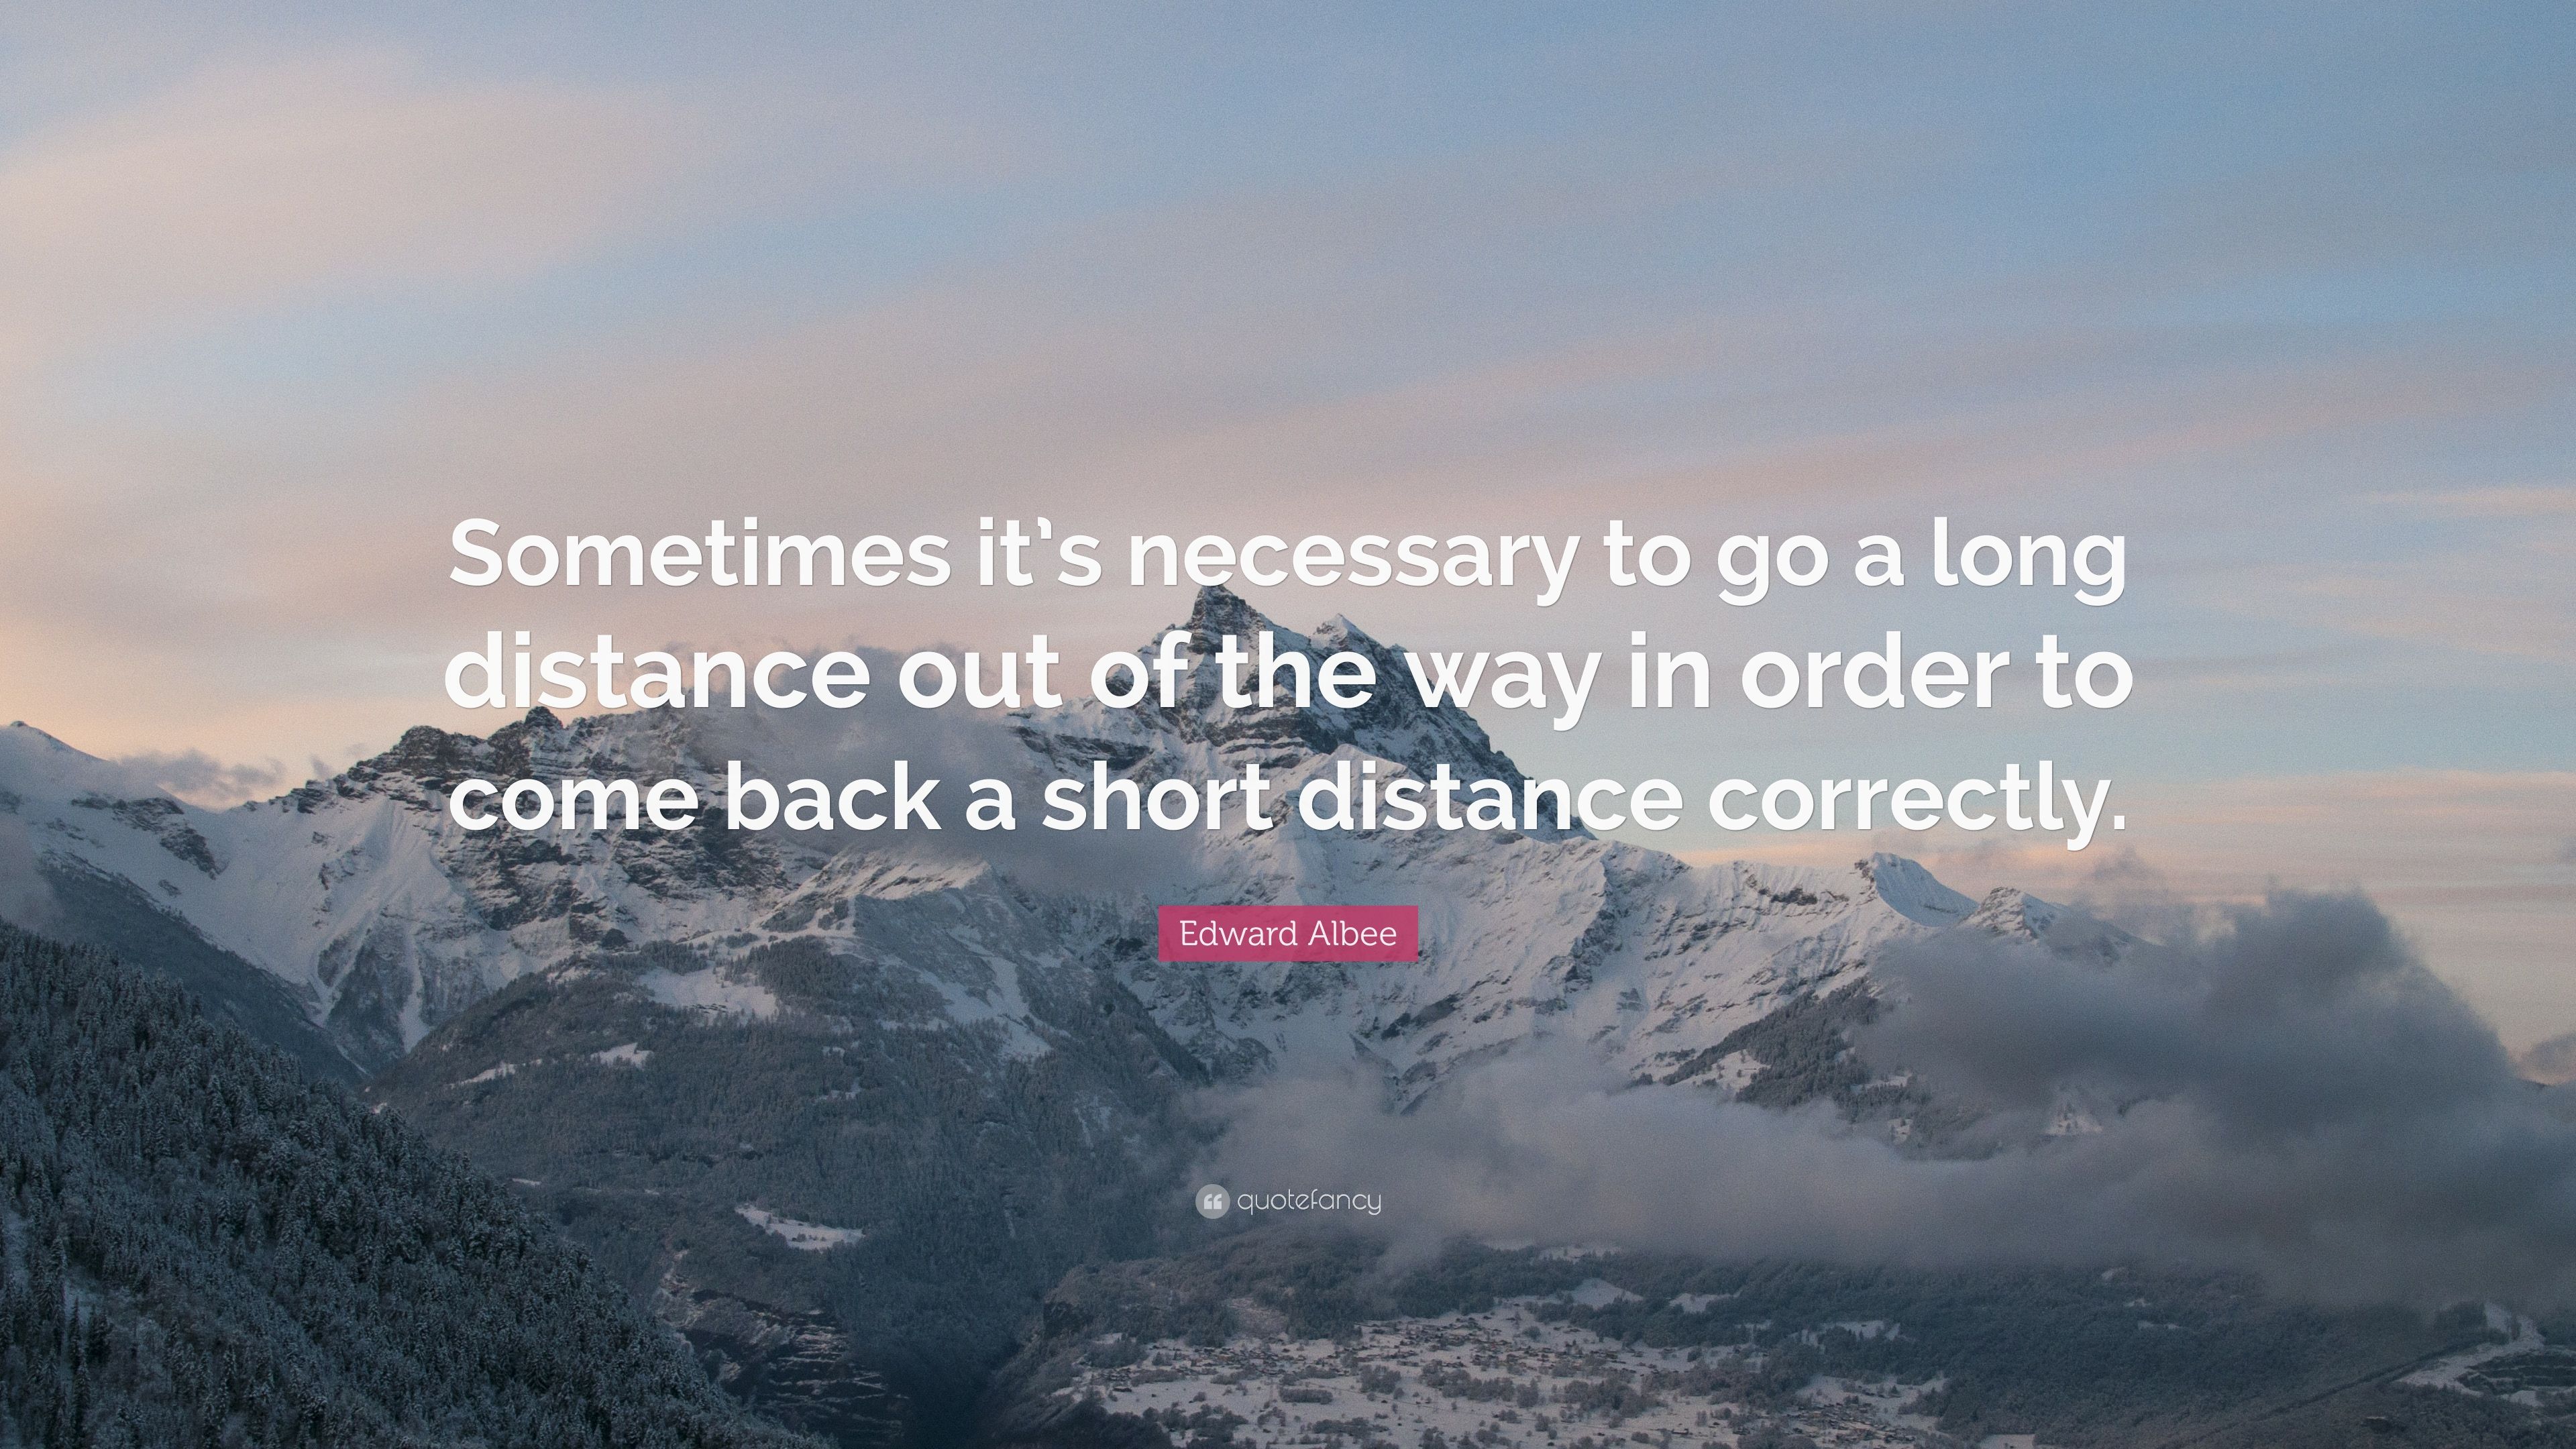 Edward Albee Quote: “Sometimes it's necessary to go a long